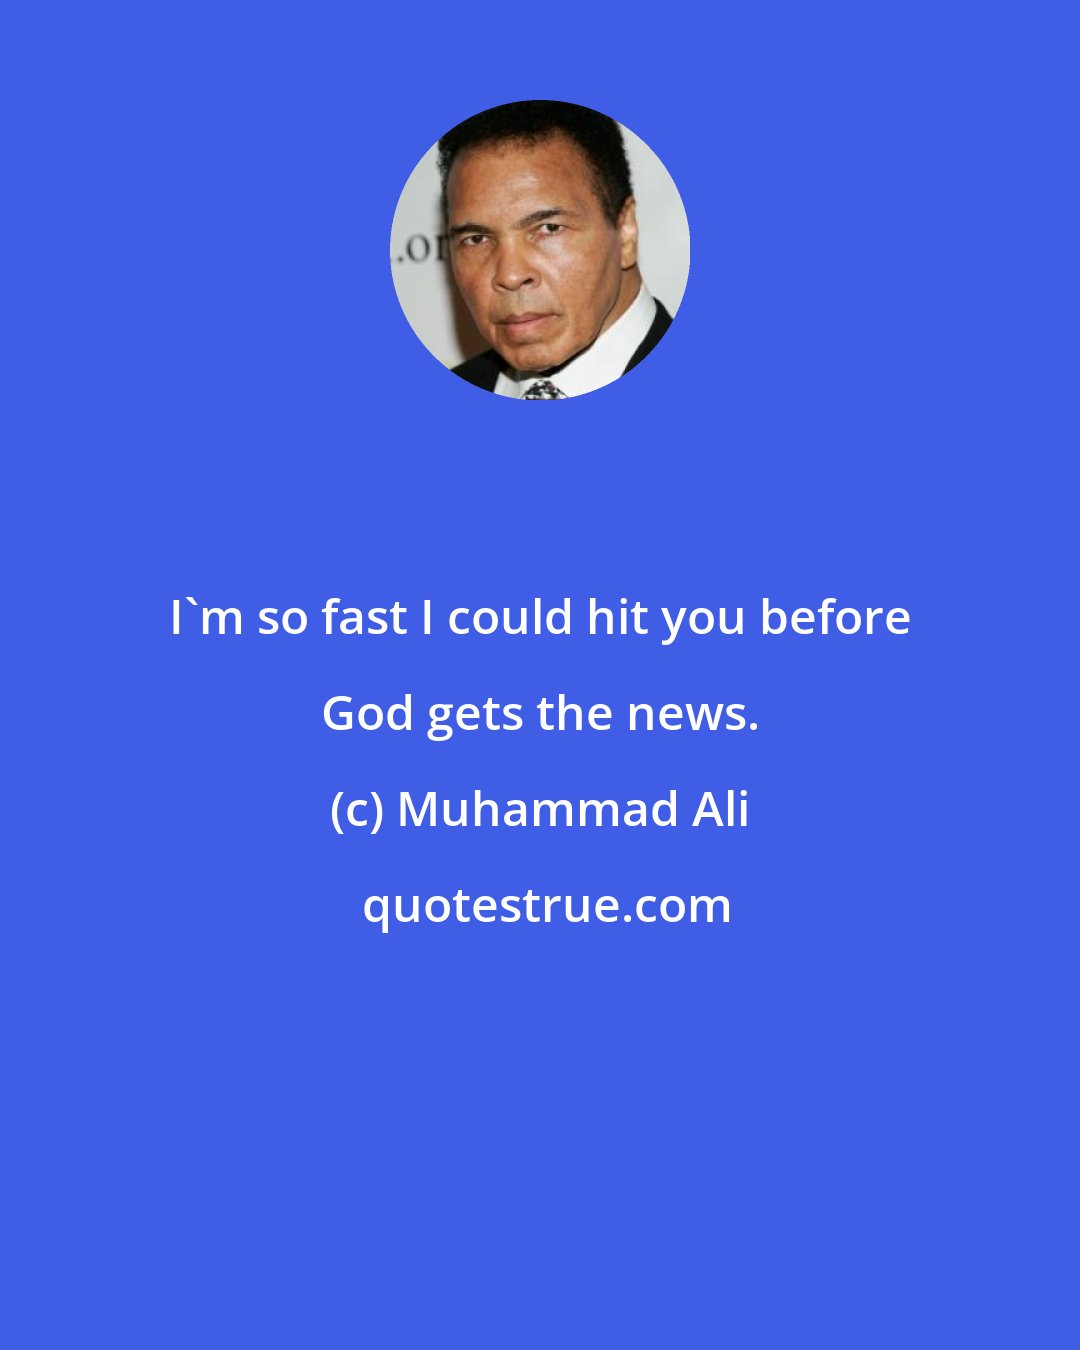 Muhammad Ali: I'm so fast I could hit you before God gets the news.